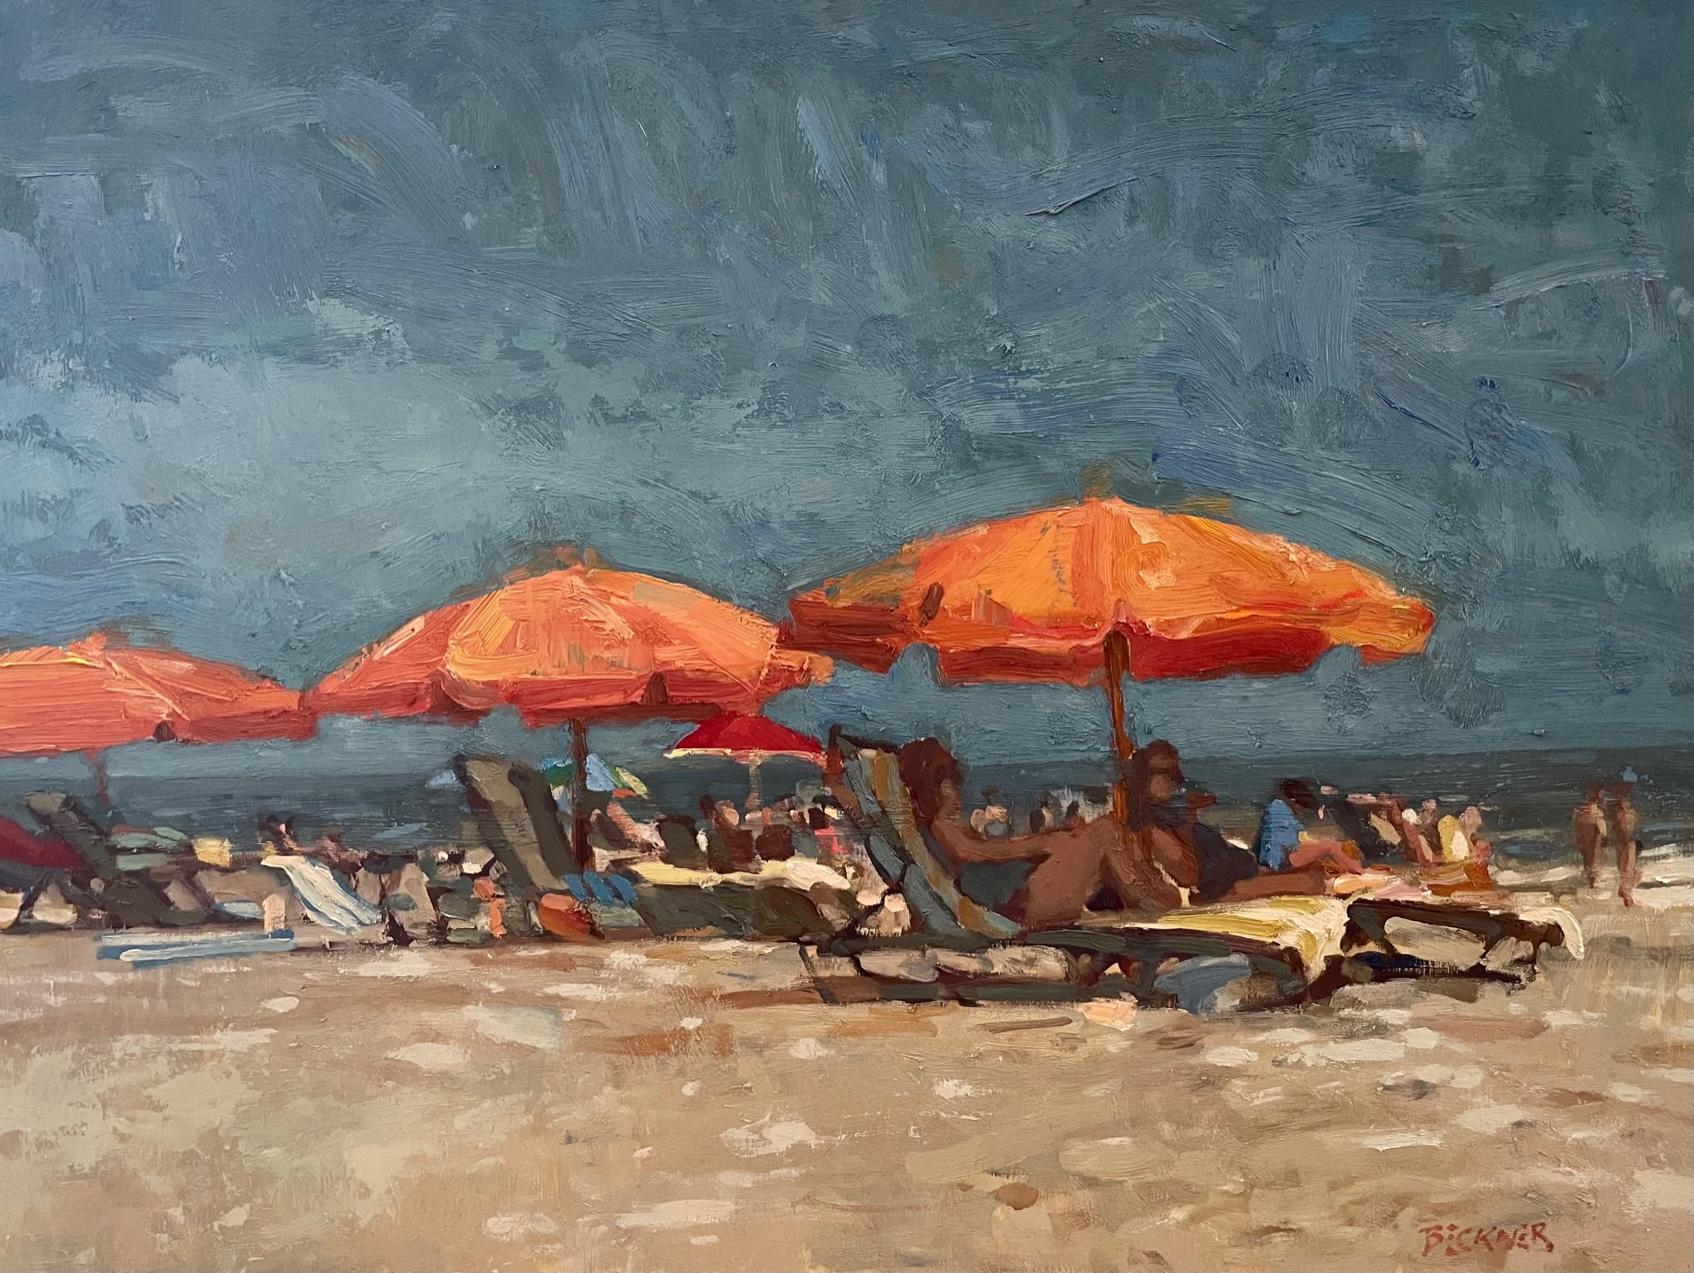 Hilton Head Beach is an example of the bright colors that Beckner uses in his paintings. The orange umbrella paintings were painted at Hilton Head, South Carolina in 2022. Jim Beckner just finished a series of beach paintings at Hilton Head.. All of